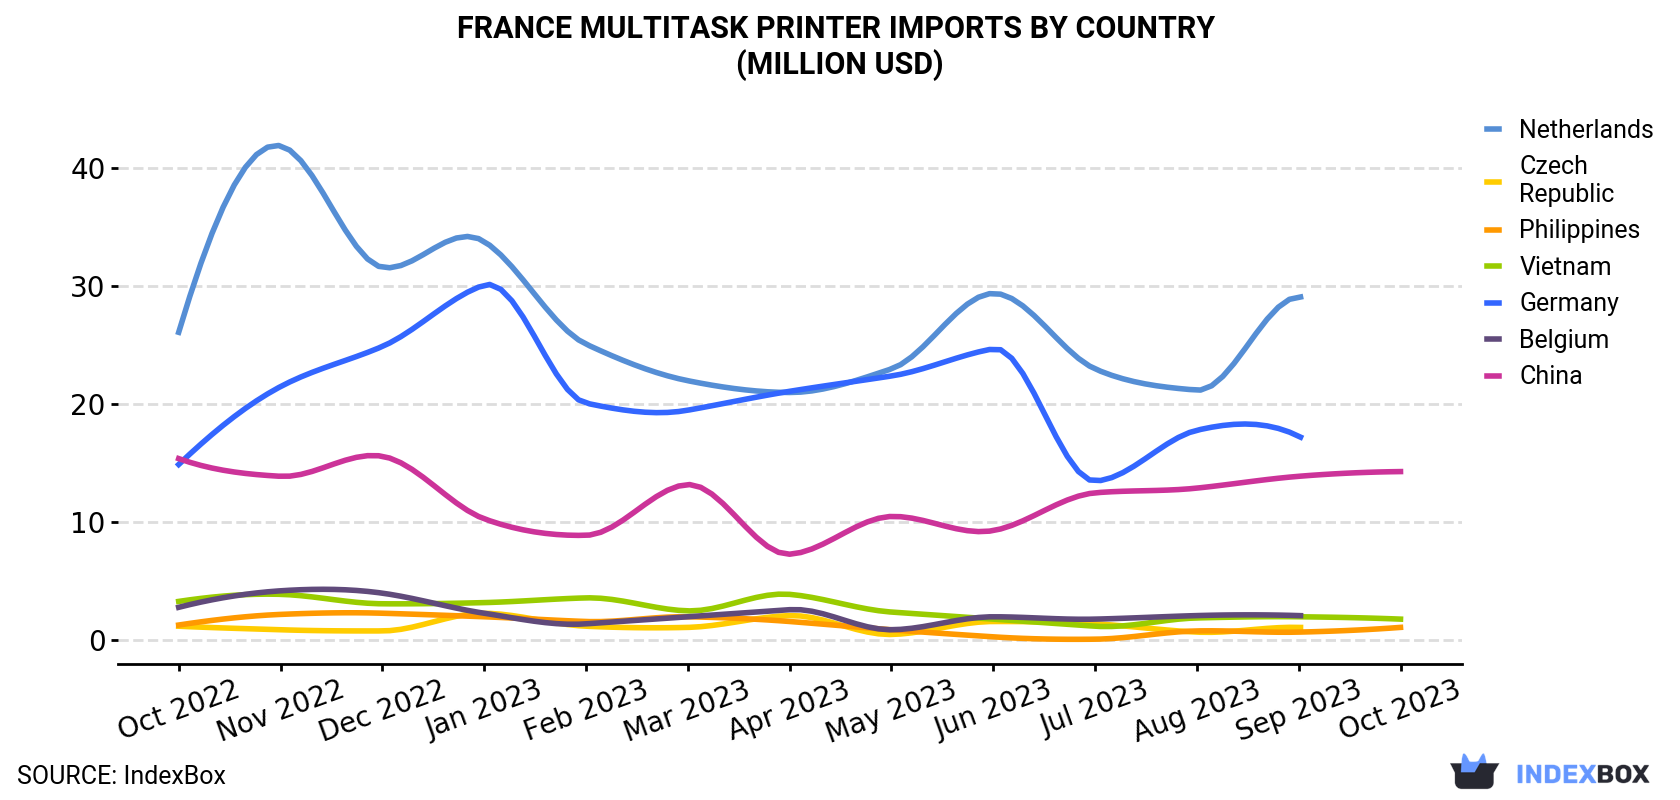 France Multitask Printer Imports By Country (Million USD)